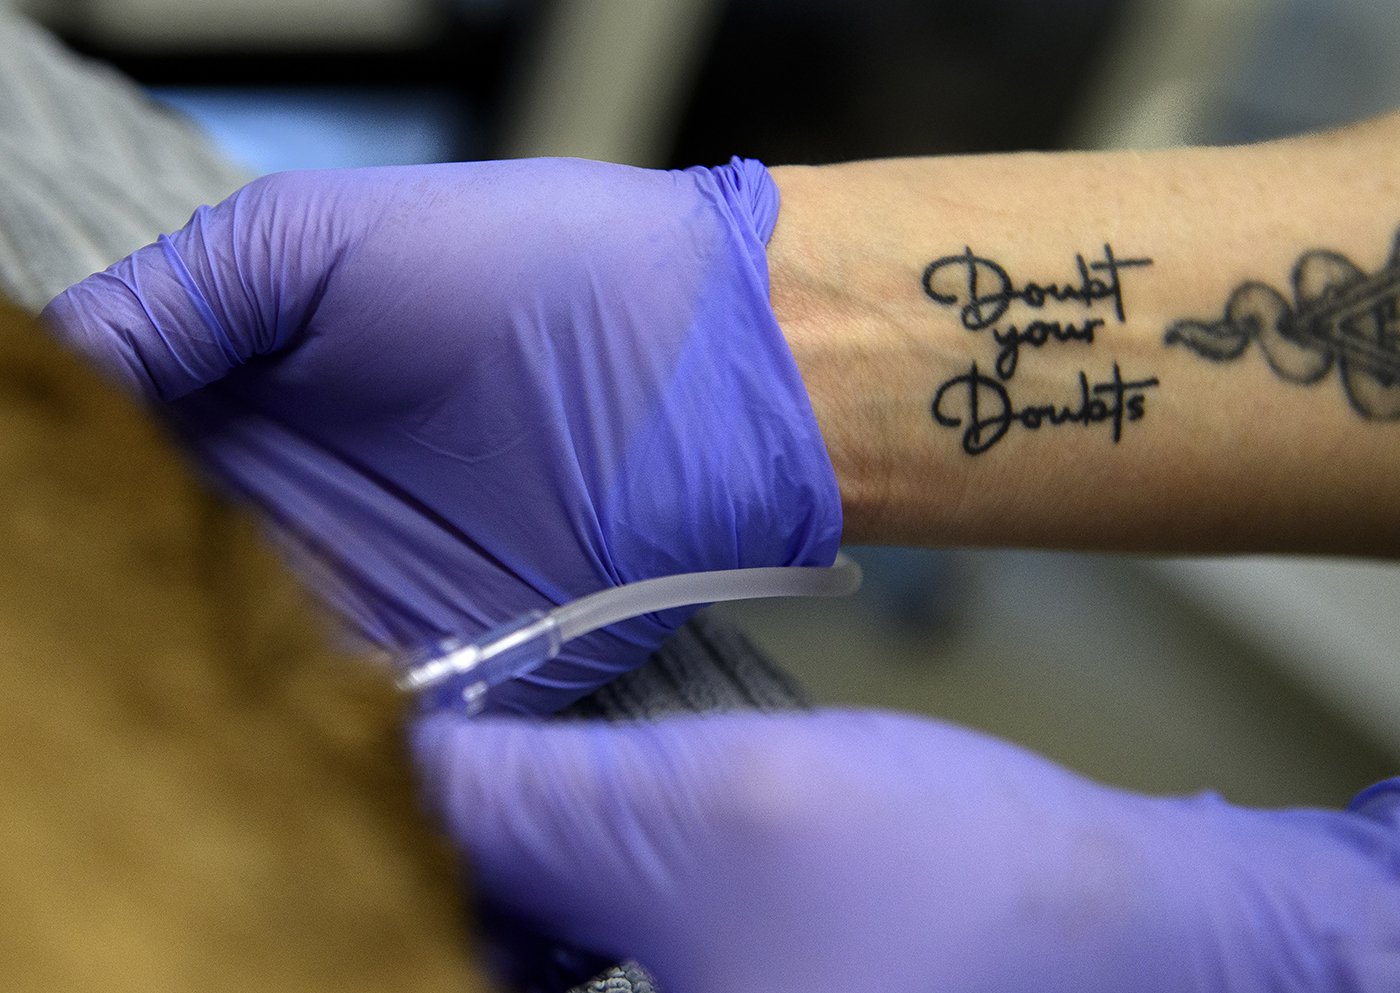  Vet tech Lauren Genger wears her philosophy on her wrist as she works on an animal at Serrano Animal Hospital in Lake Forest on Monday, March 1, 2021.  